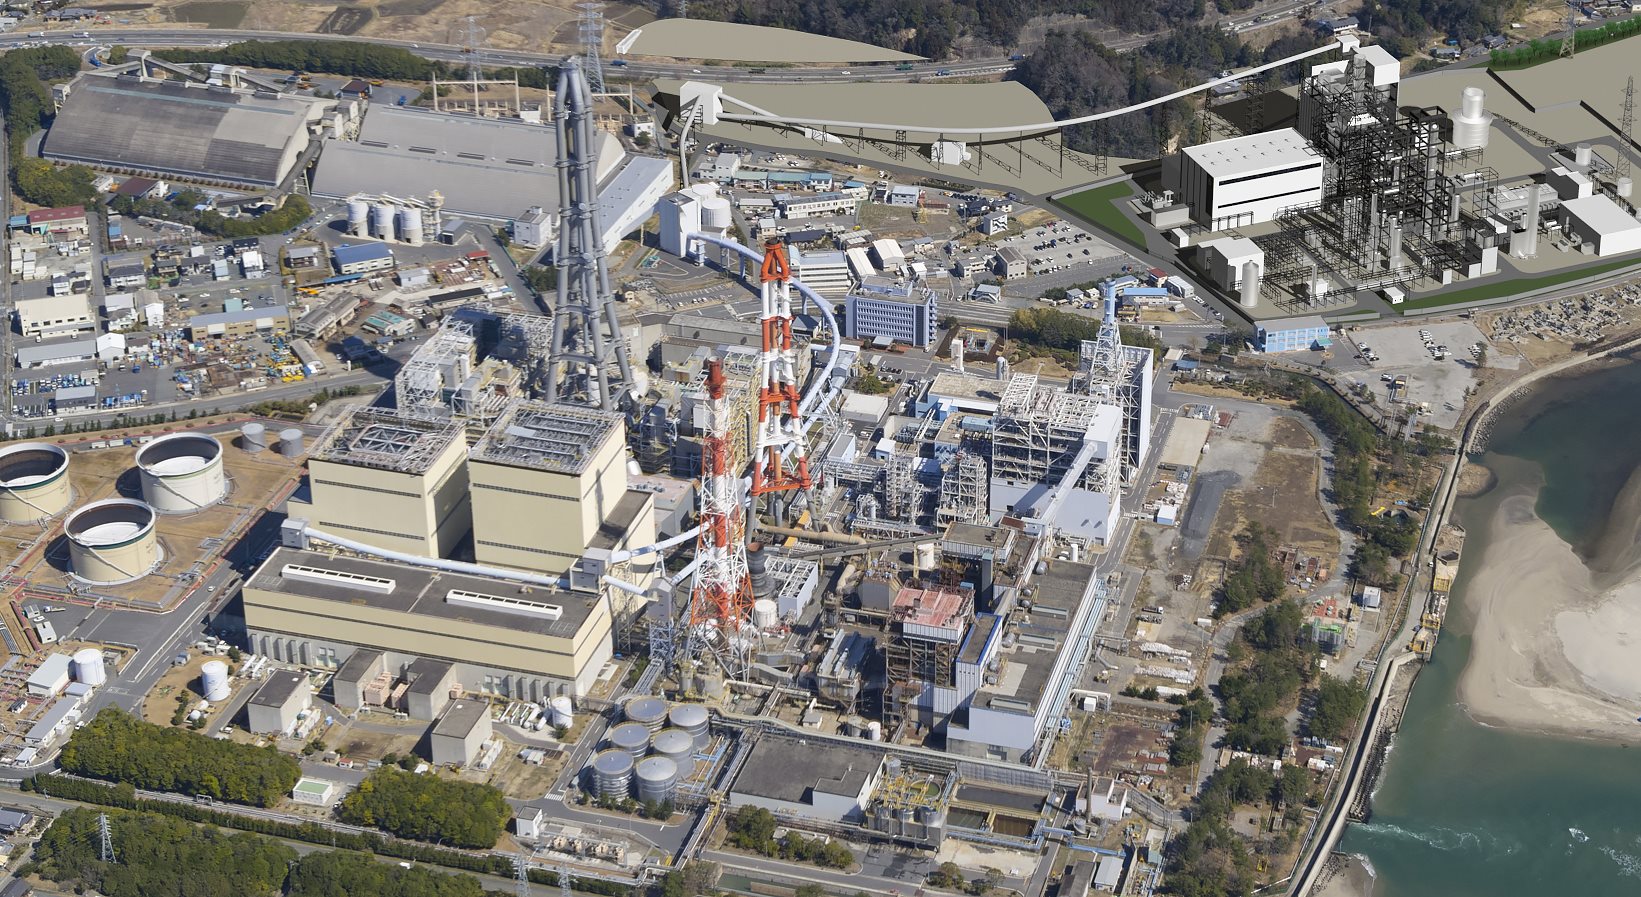 Arial view of the power plant